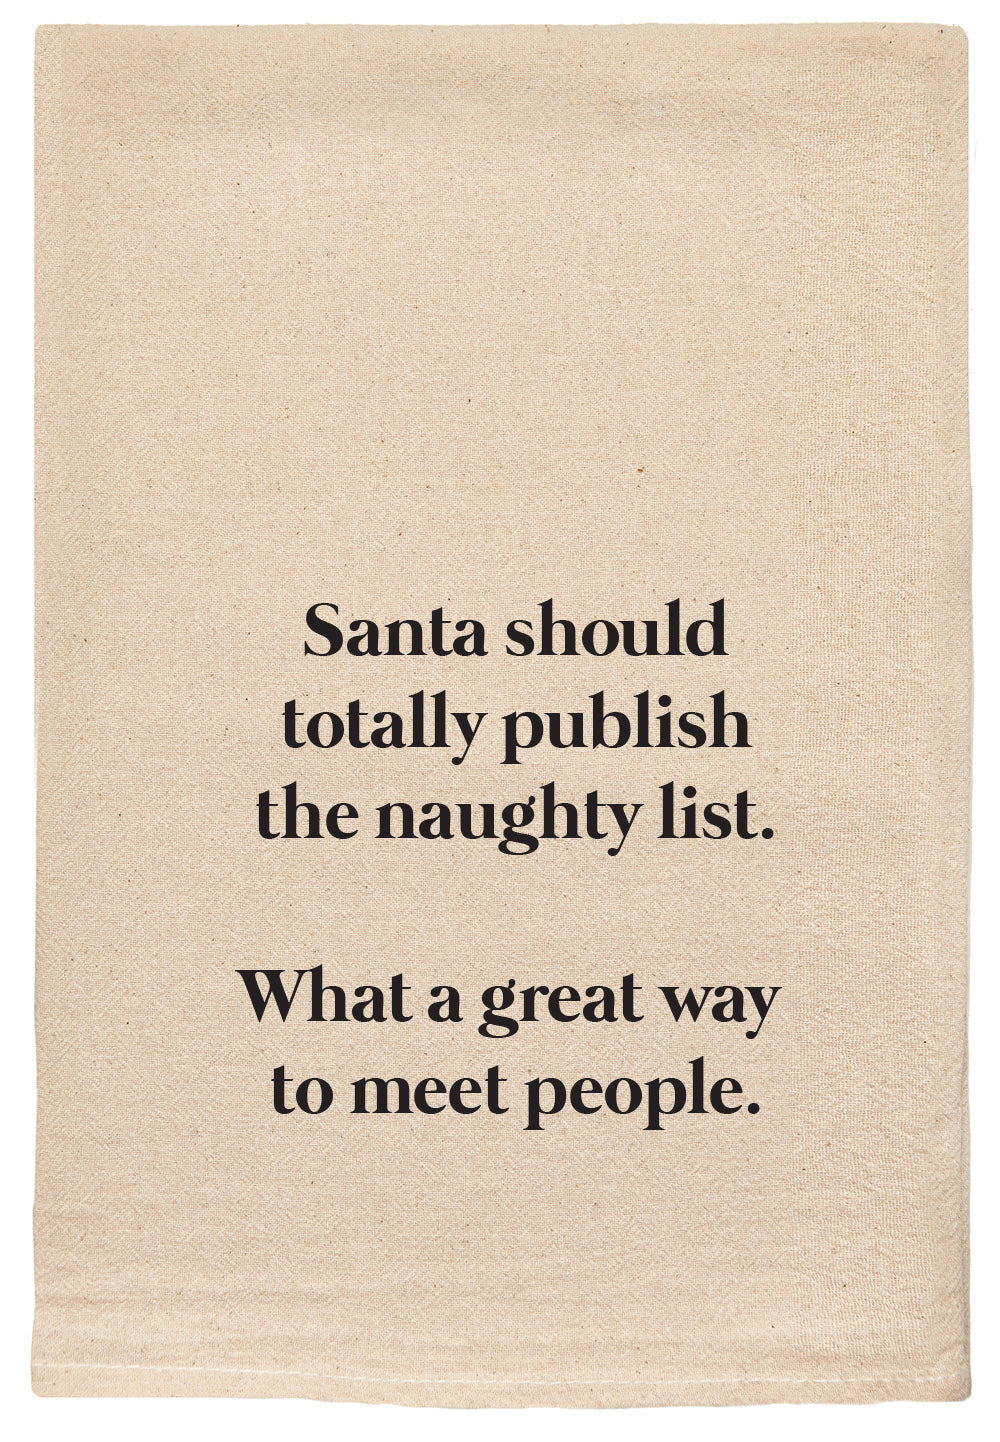 Santa should totally publish the naughty list. What a great way to meet people.